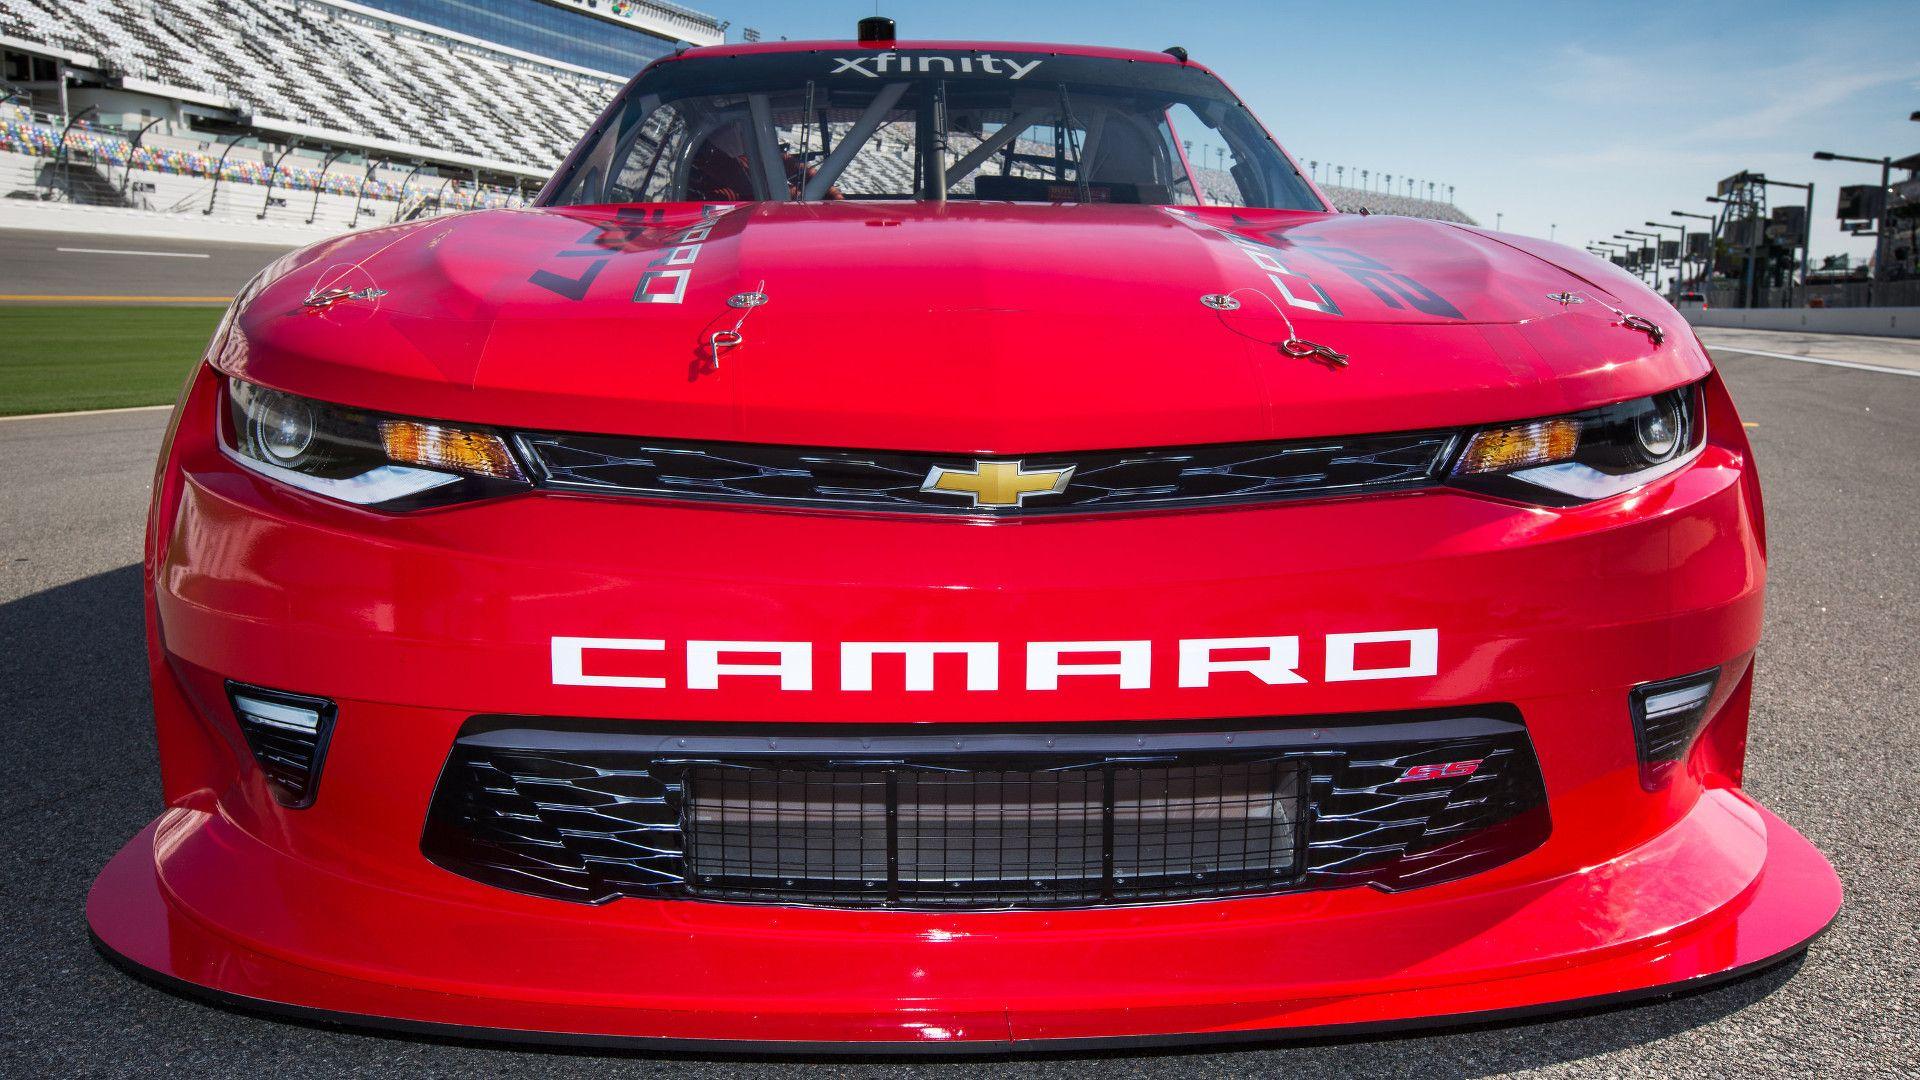 NASCAR's Chevrolet Camaro to have a new look for 2017